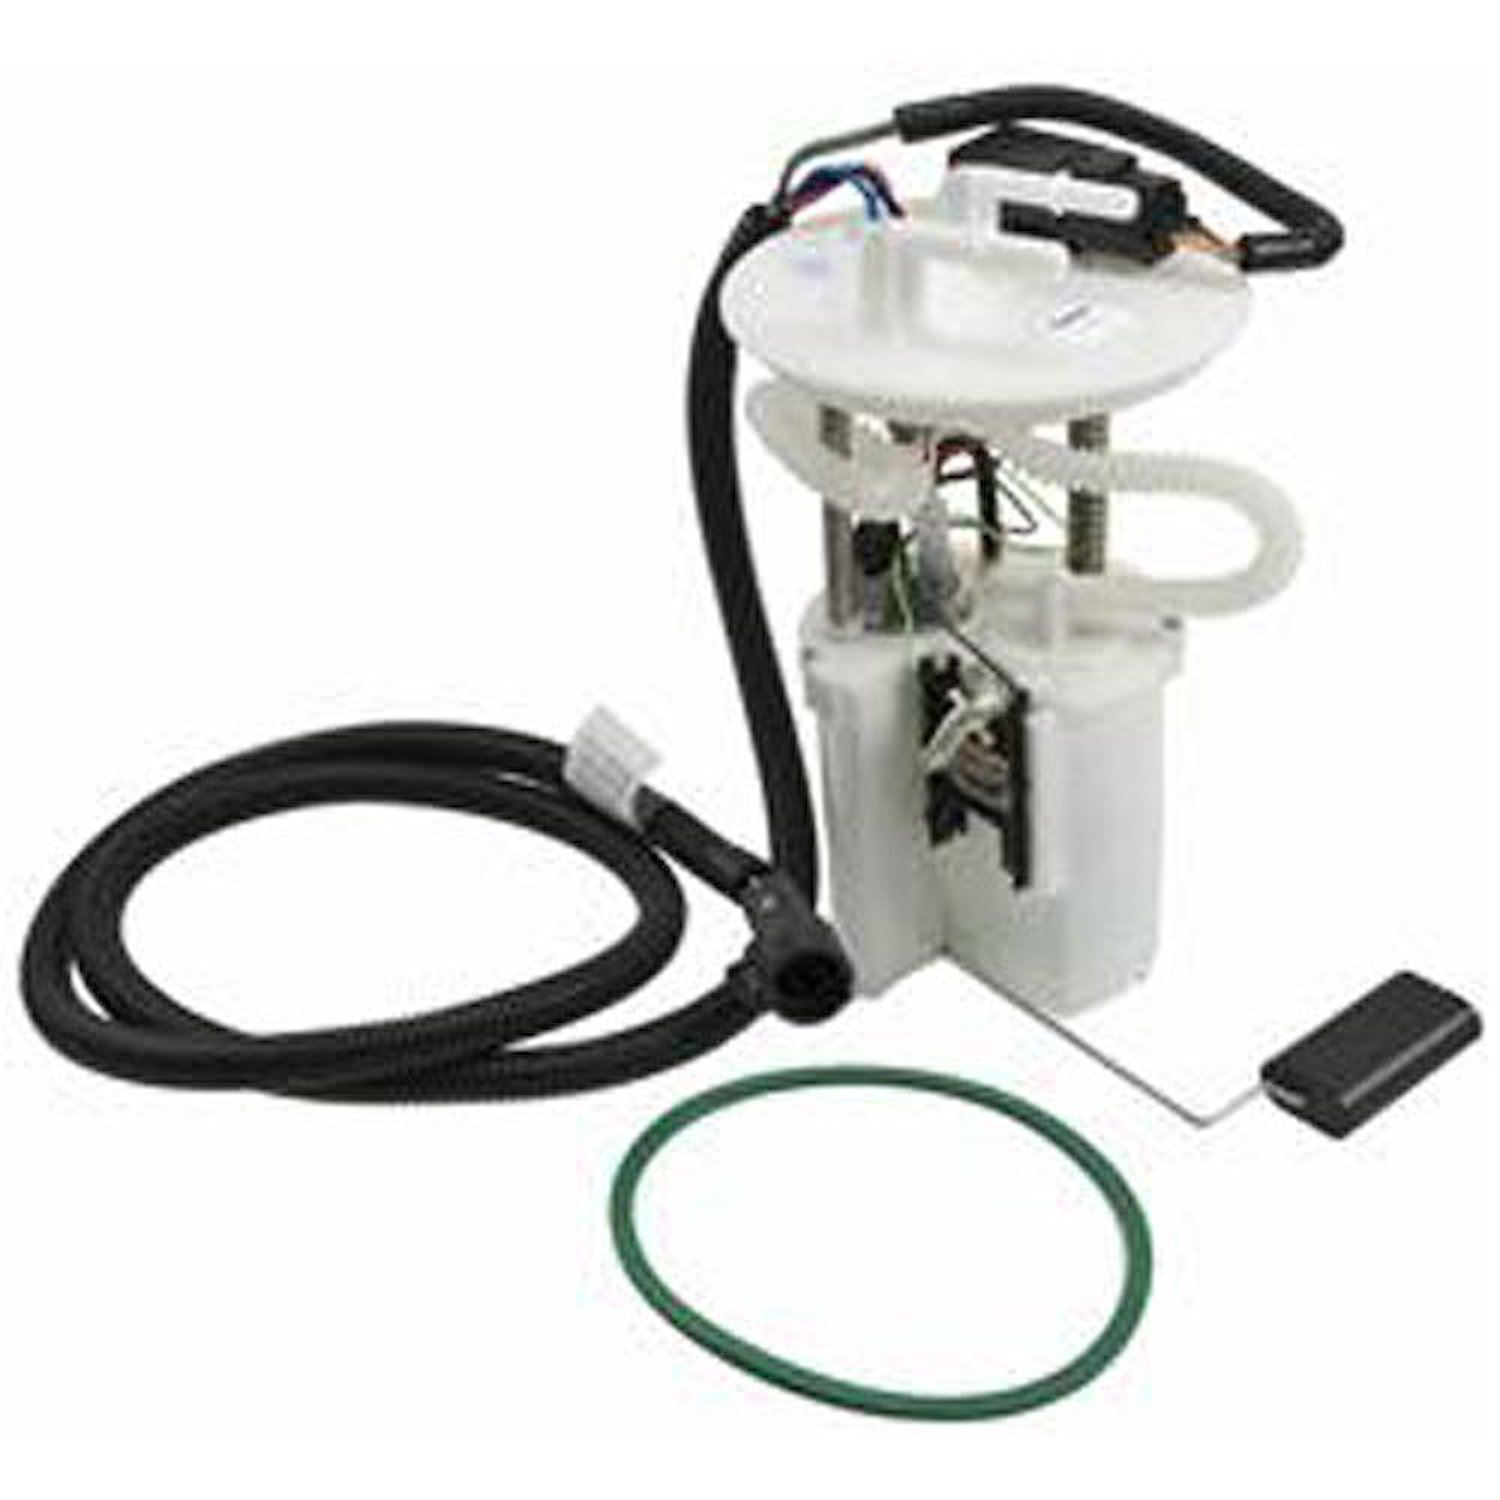 OE Ford Replacement Electric Fuel Pump Module Assembly 1999-00 Ford Windstar 3.0L/3.8L V6